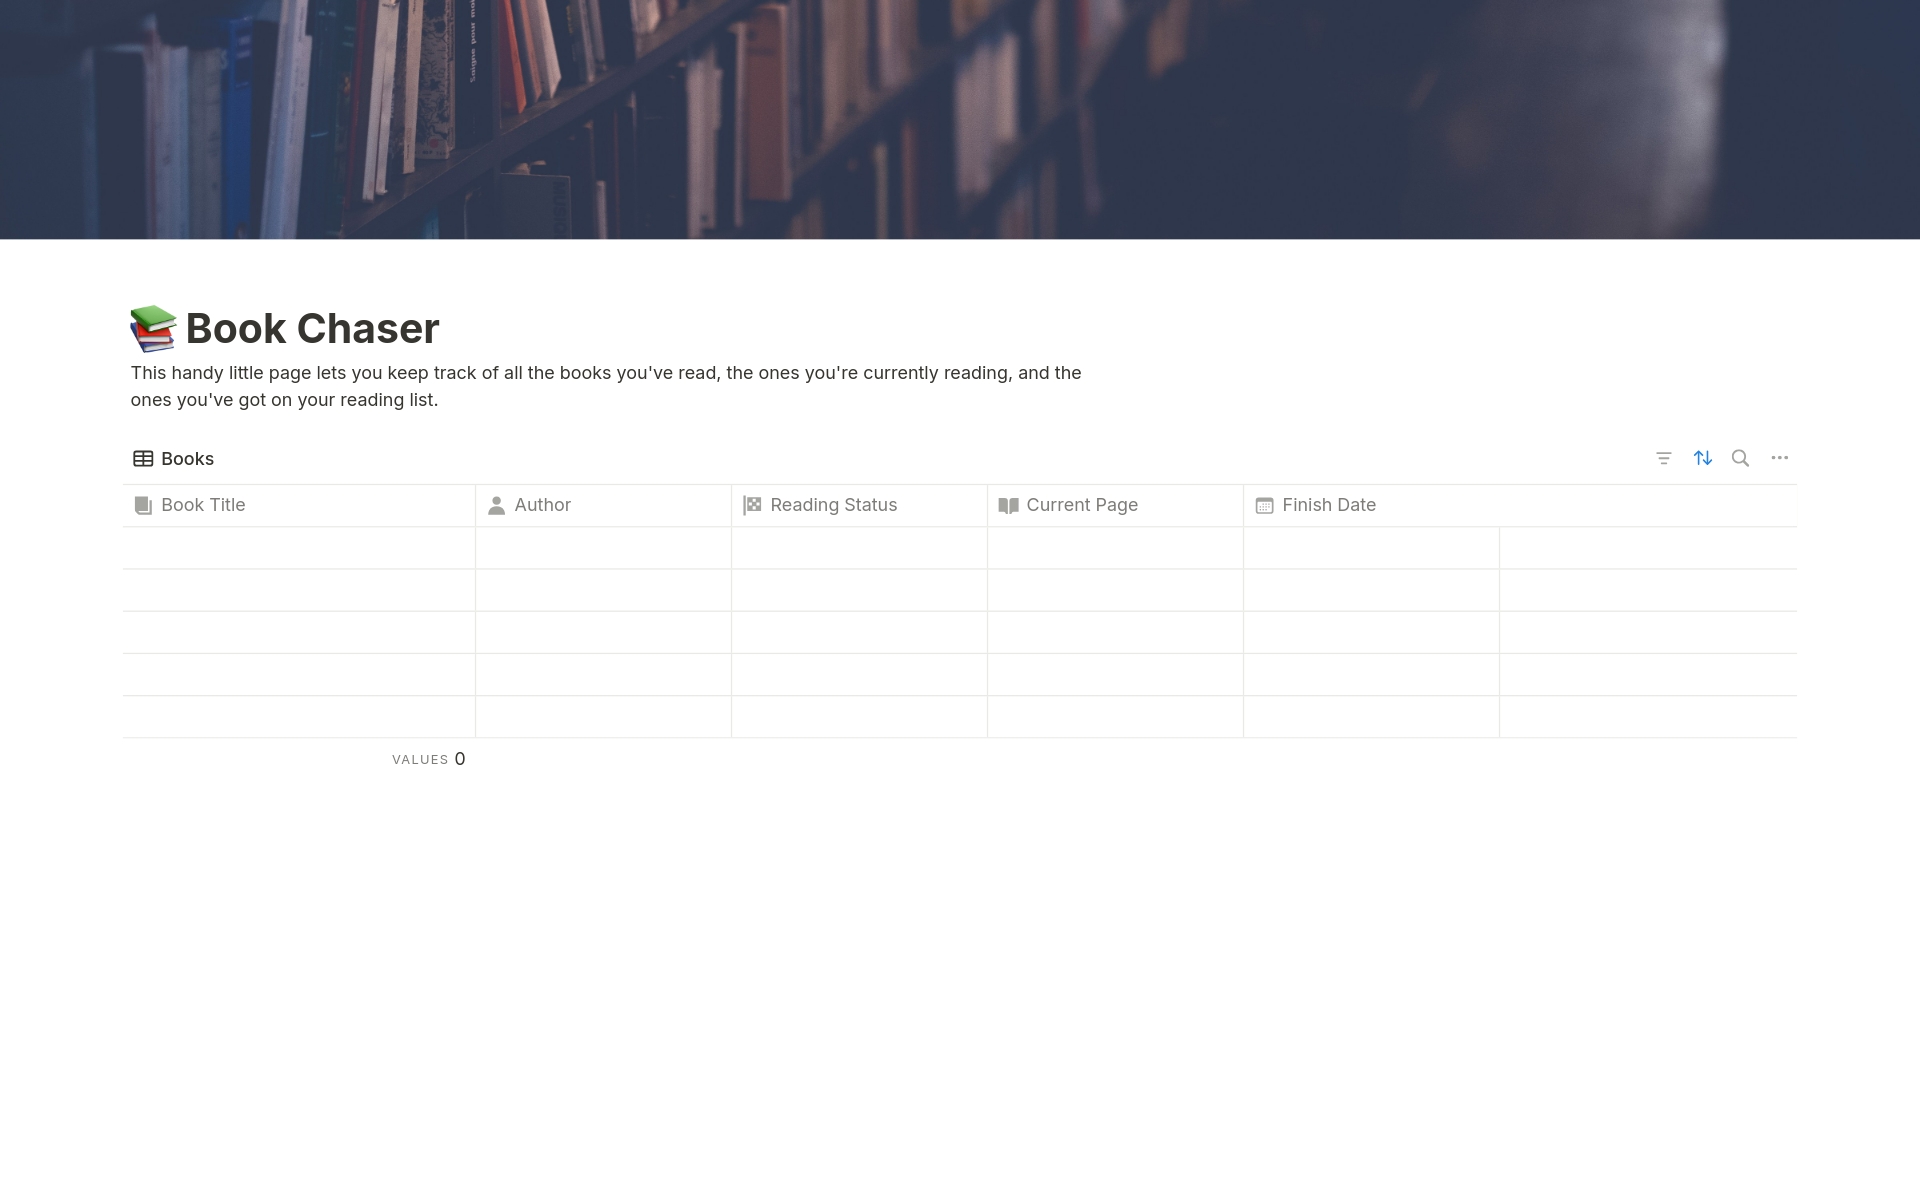 This handy little page lets you keep track of all the books you've read, the ones you're currently reading, and the ones you've got on your reading list.